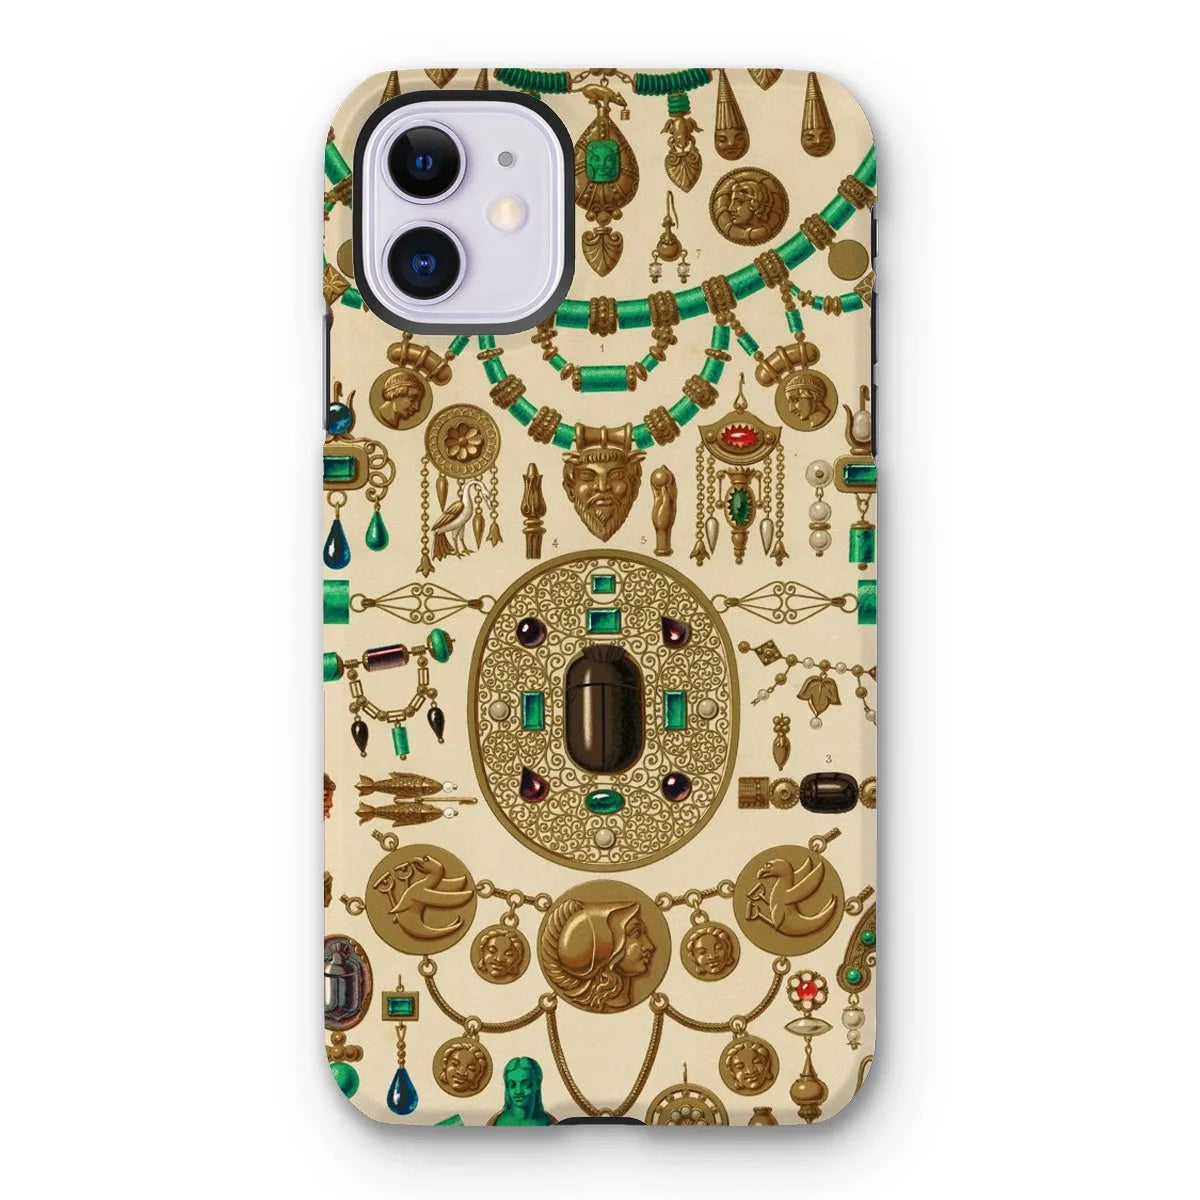 Etruscan Jewelry By Auguste Racinet Art Phone Case - Iphone 11 / Matte - Mobile Phone Cases - Aesthetic Art